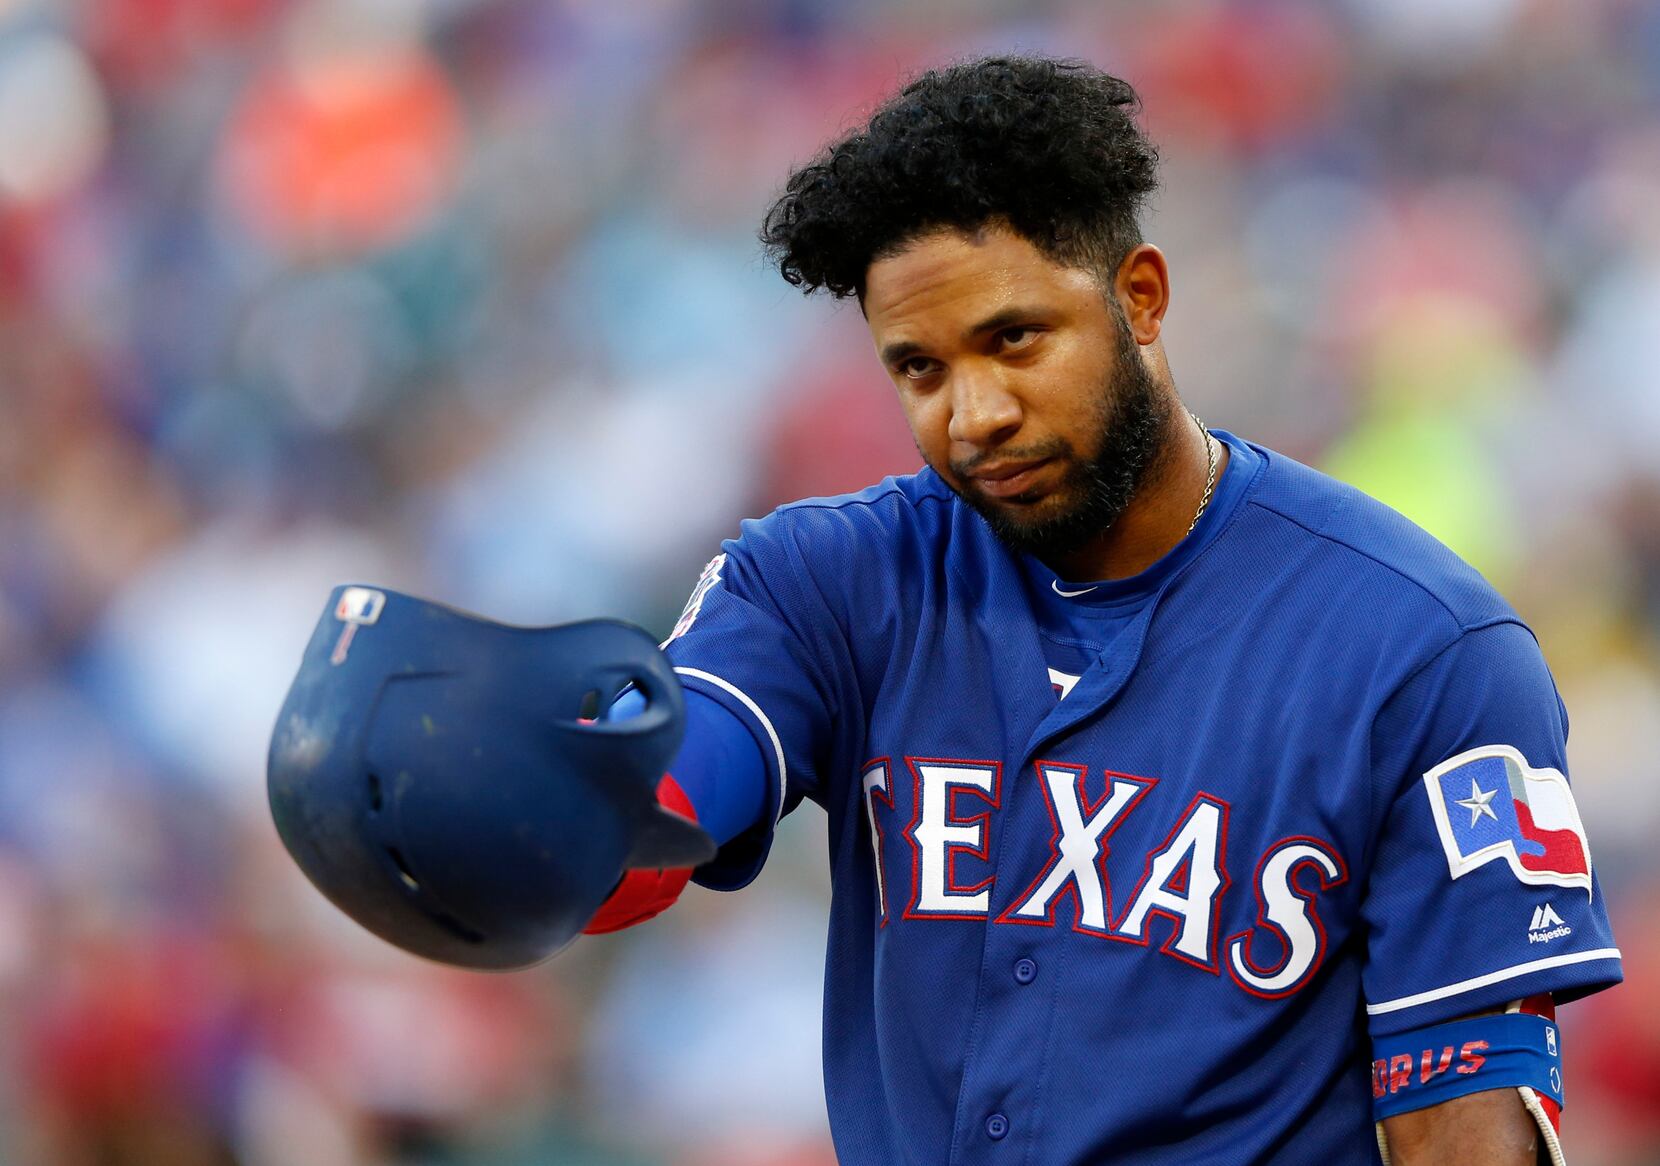 Coming off a down year, Rangers veteran Elvis Andrus has self-improvement  and job security on his mind